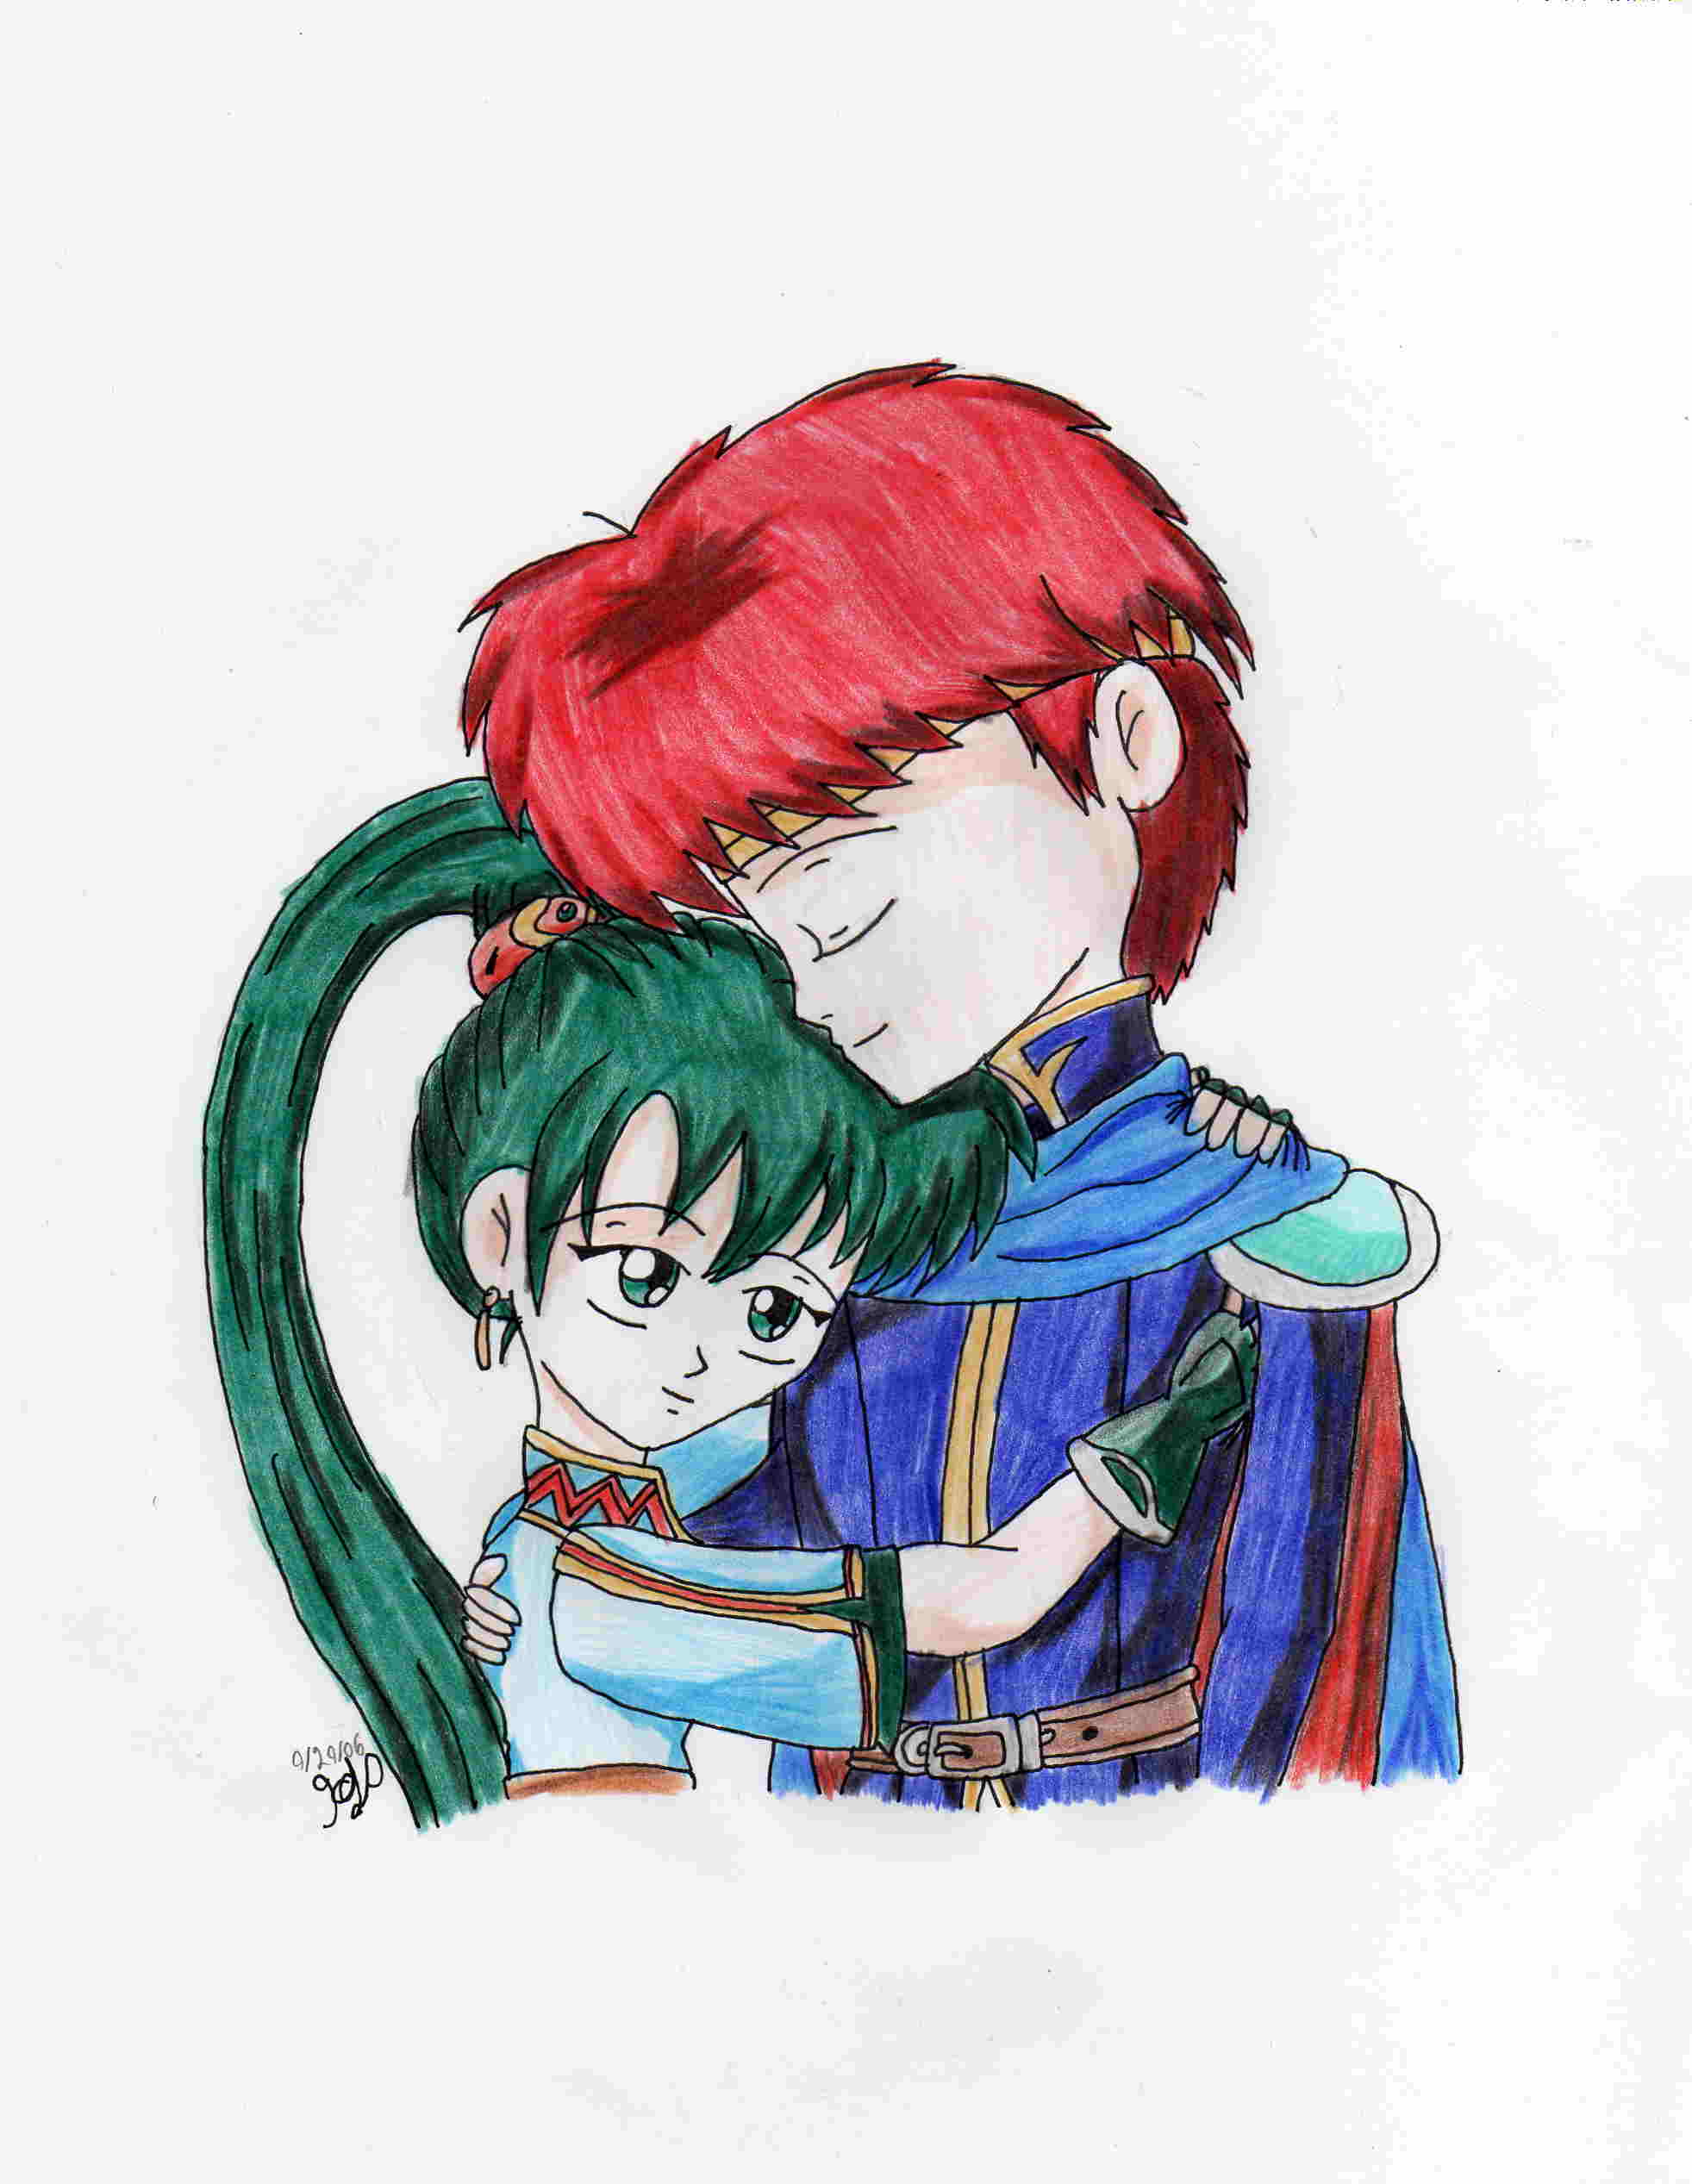 Eliwood and Lyndis by Nintendo_Nut